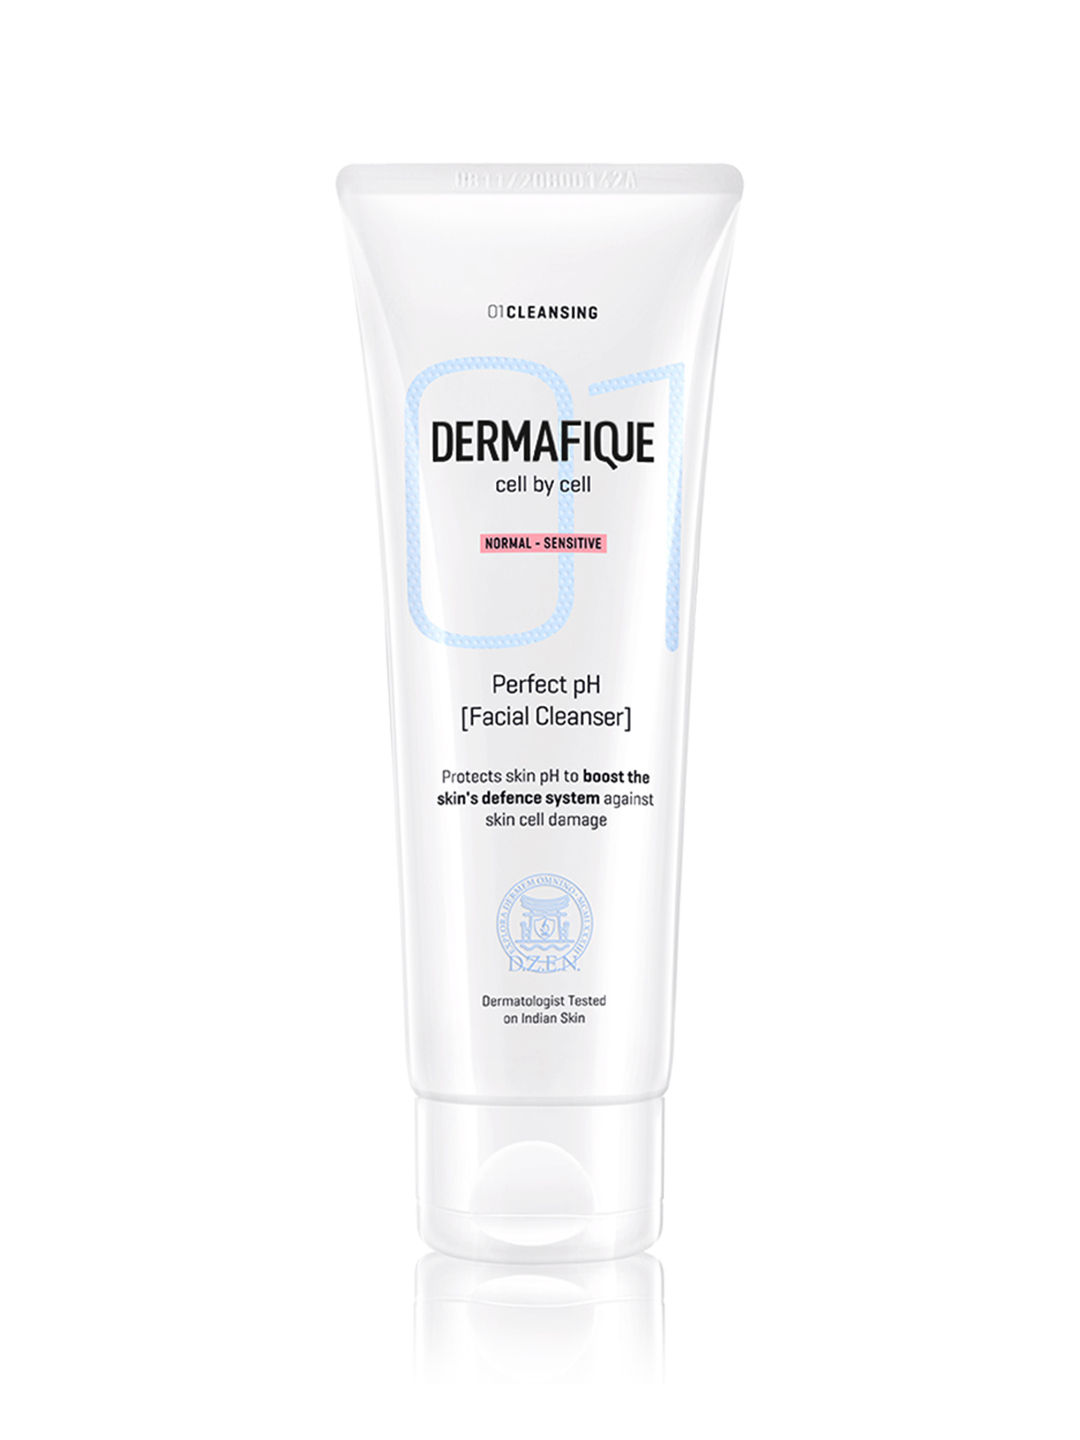 Buy Dermafique Perfect pH Facial Cleanser – 100ml, Gently Remove Impurities, Ultra Mild Facial Cleanser | Soap, Paraben & Alcohol Free - Purplle